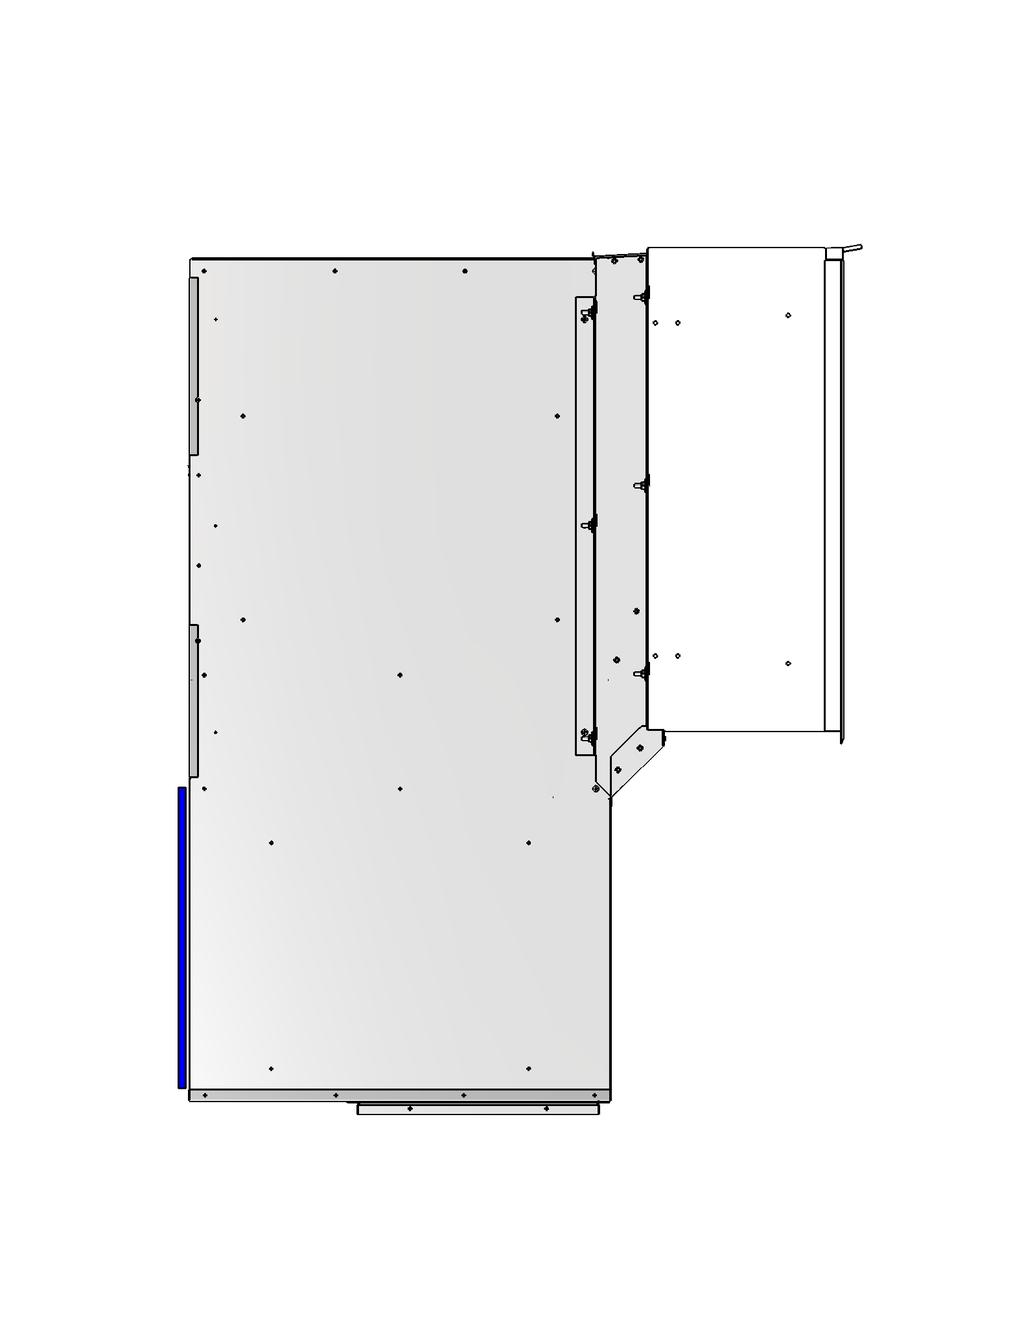 5 (89mm) to the depth of the unit and allows the use of the existing wall sleeve and louver. If using this transition piece, be sure to maintain the minimum clearances required.